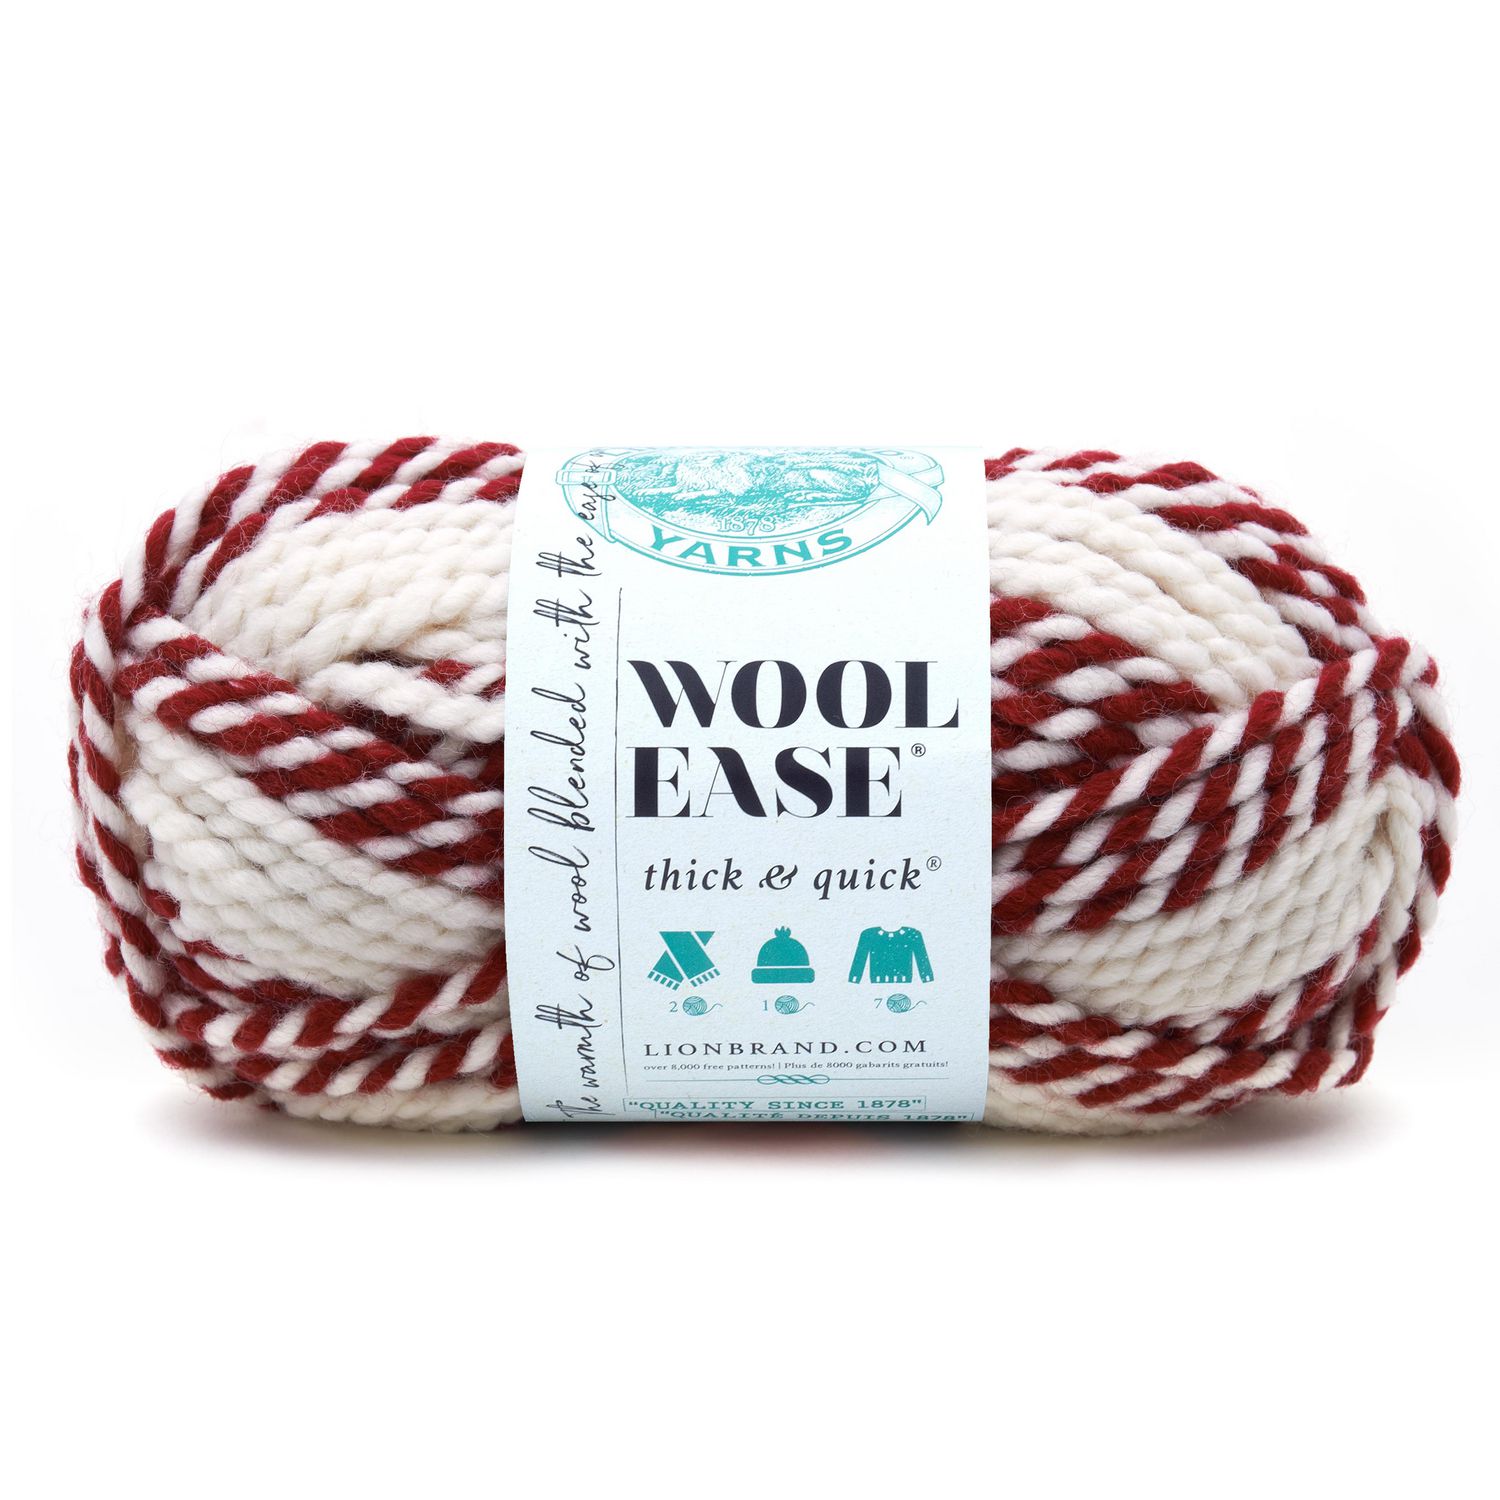 Lion Brand Yarn 640-607 Wool-Ease Thick and Quick Red Beacon Super Bulky  Wool Blend Yarn 